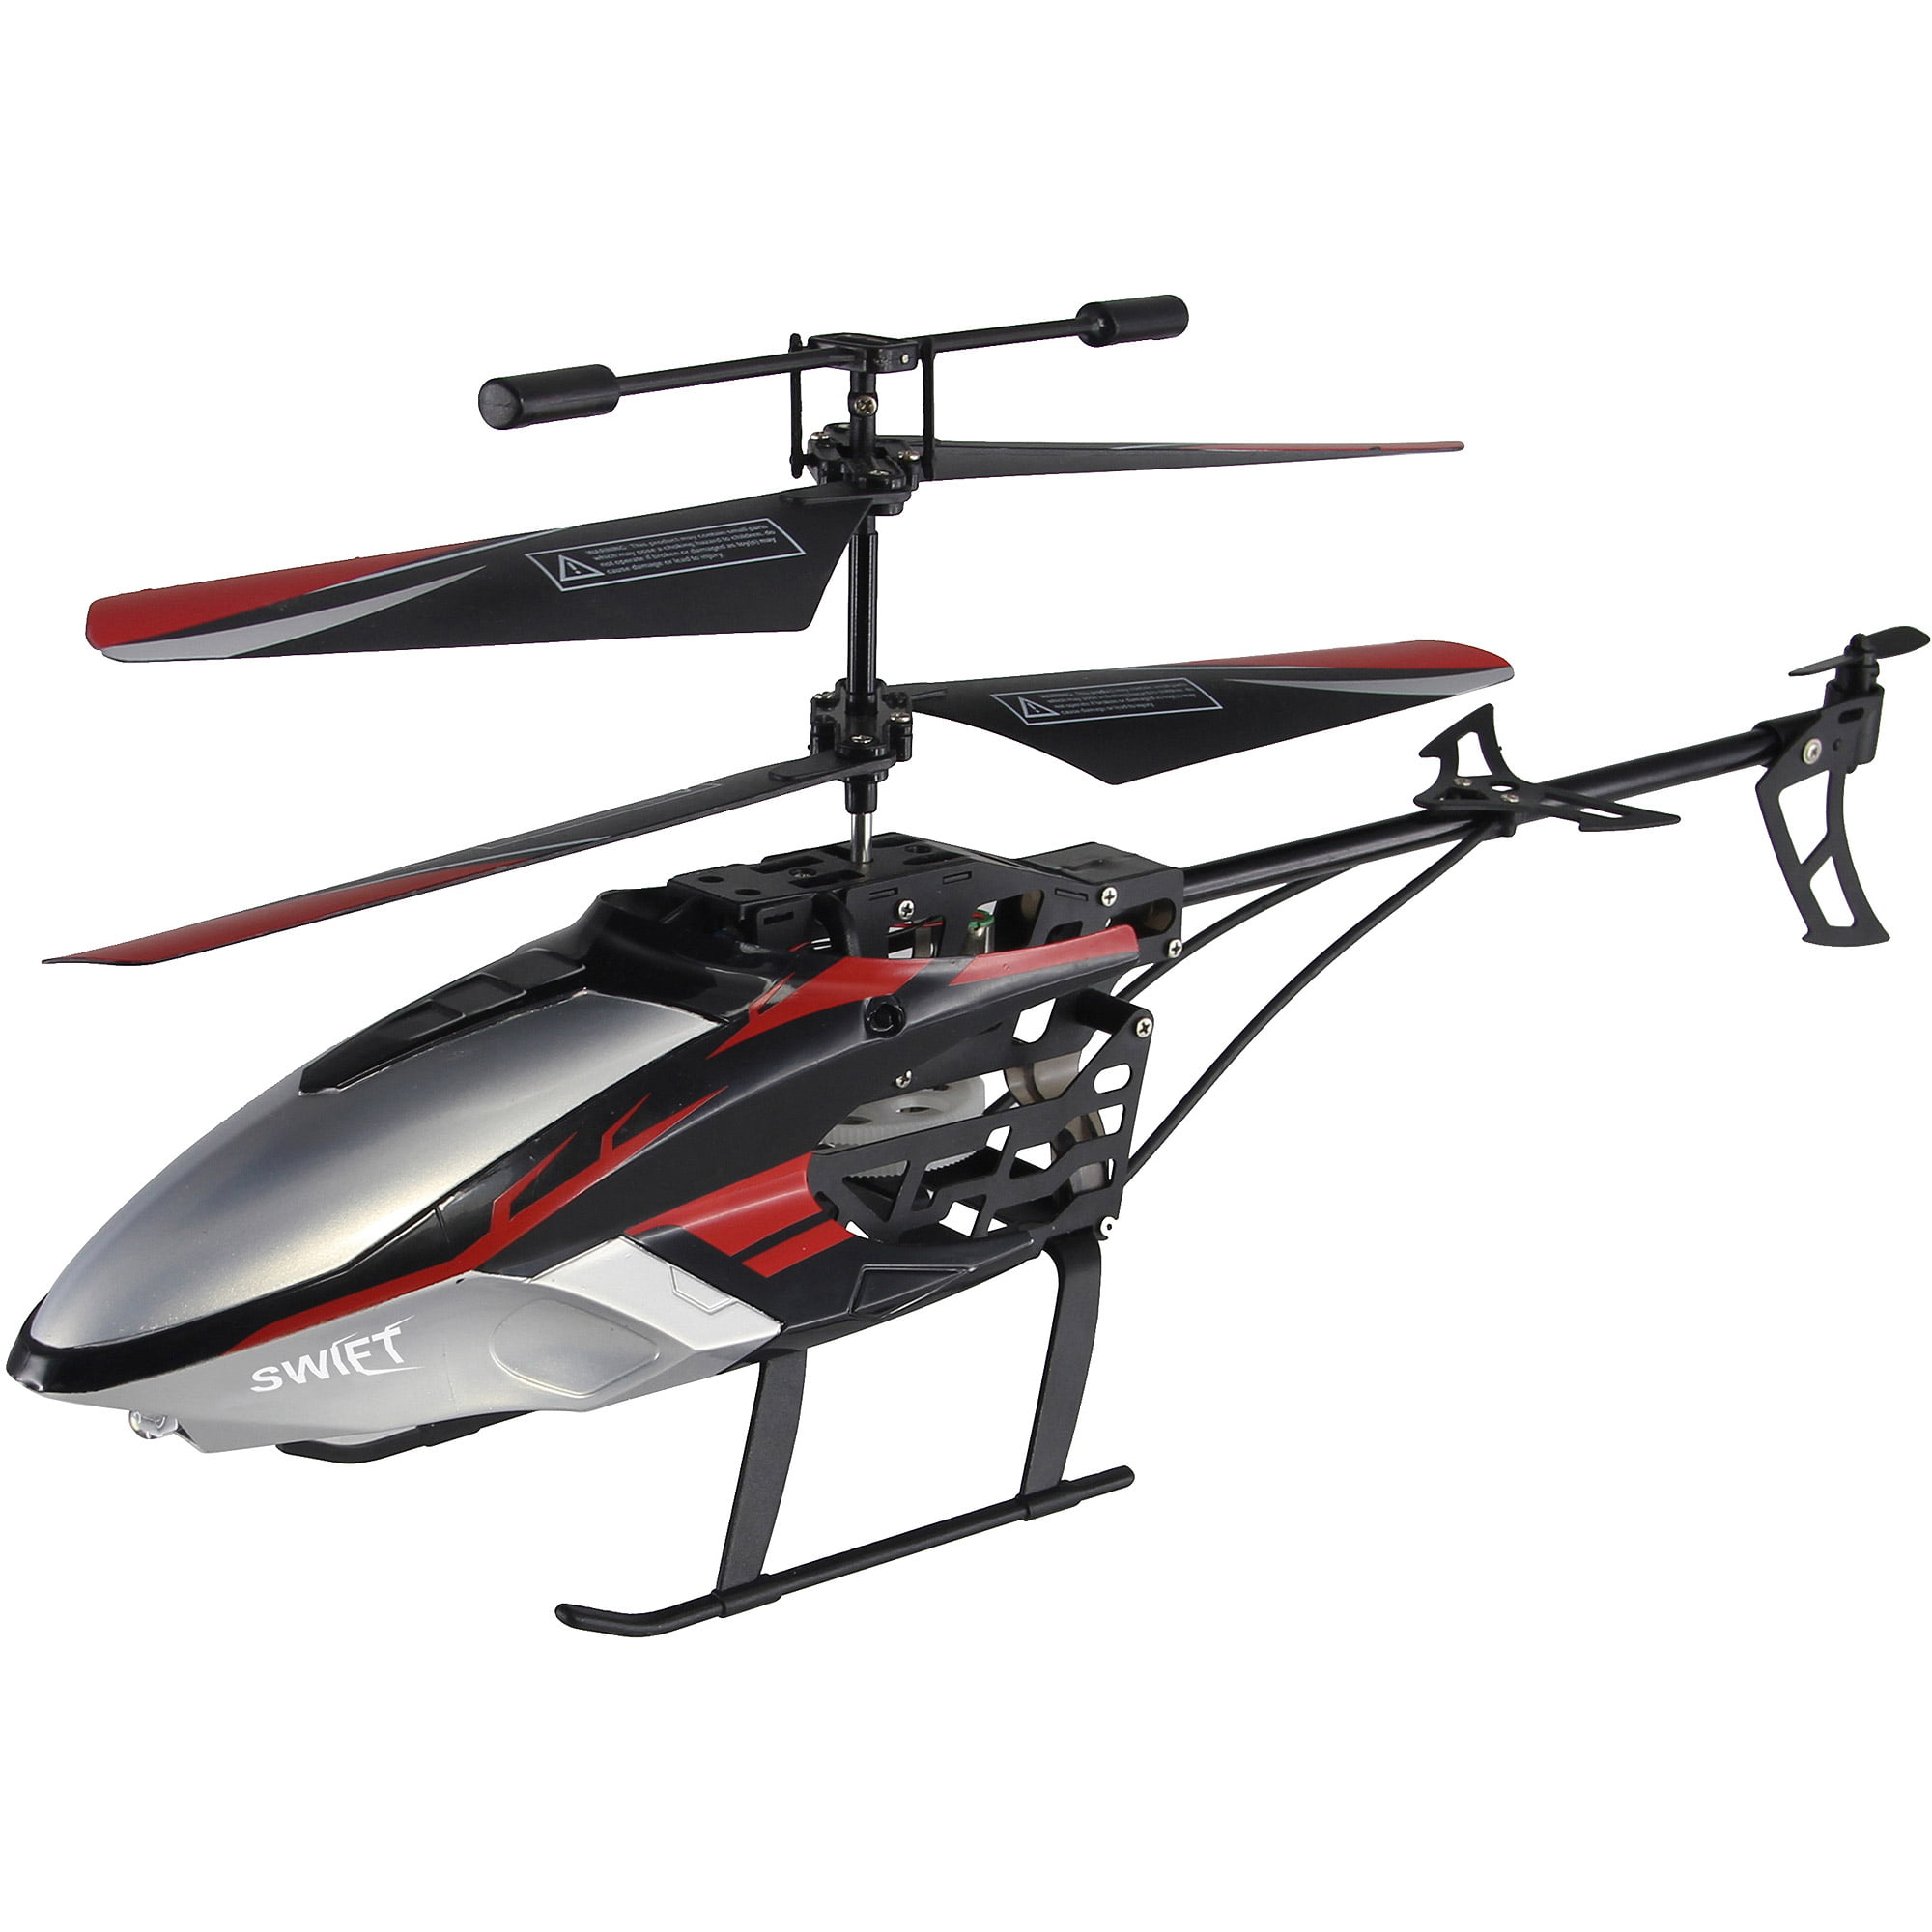 sky remote control helicopter